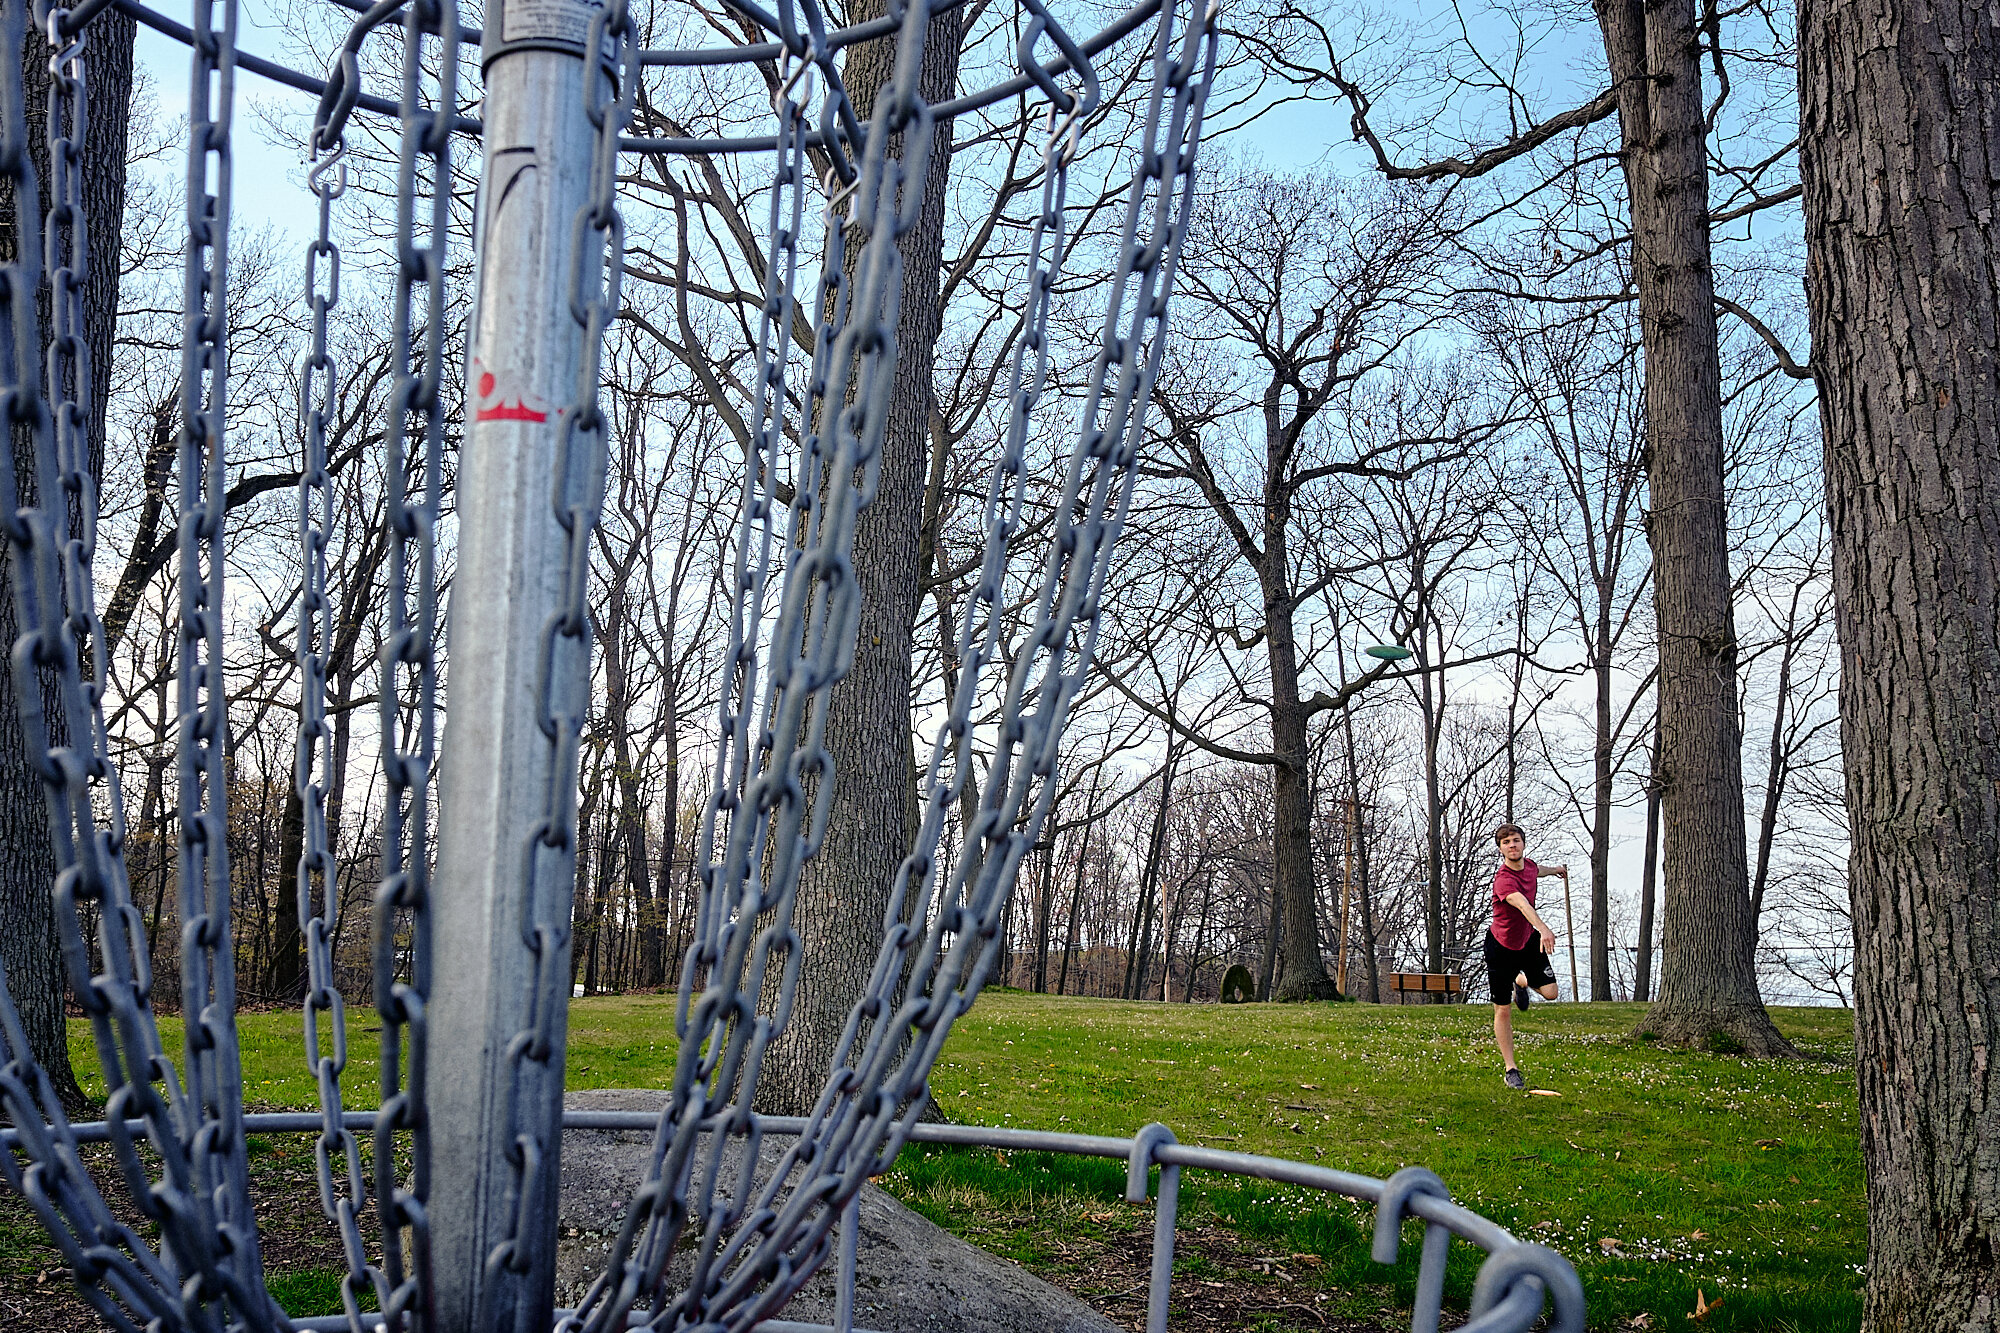  Gabriel took me out for my first round of disc golf to pass some time while on social distancing orders. Despite his infinitely superior technique, I finished only three throws behind. | 4/28/20 Bay Village, OH 